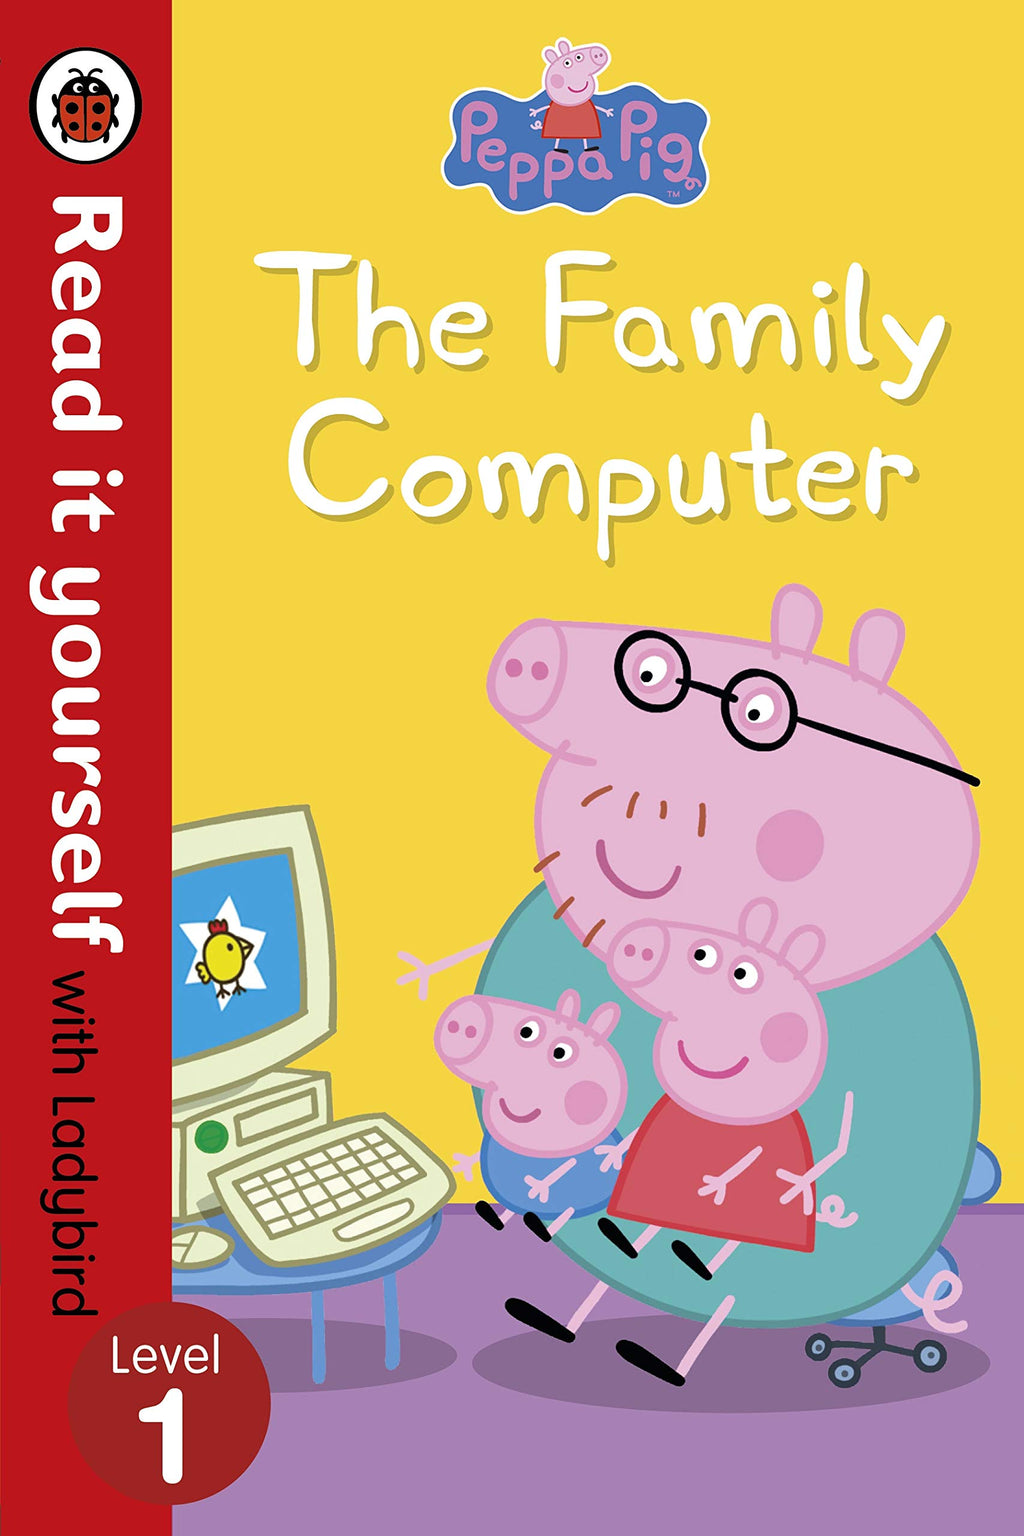 Peppa Pig Level 1: The Family Computer